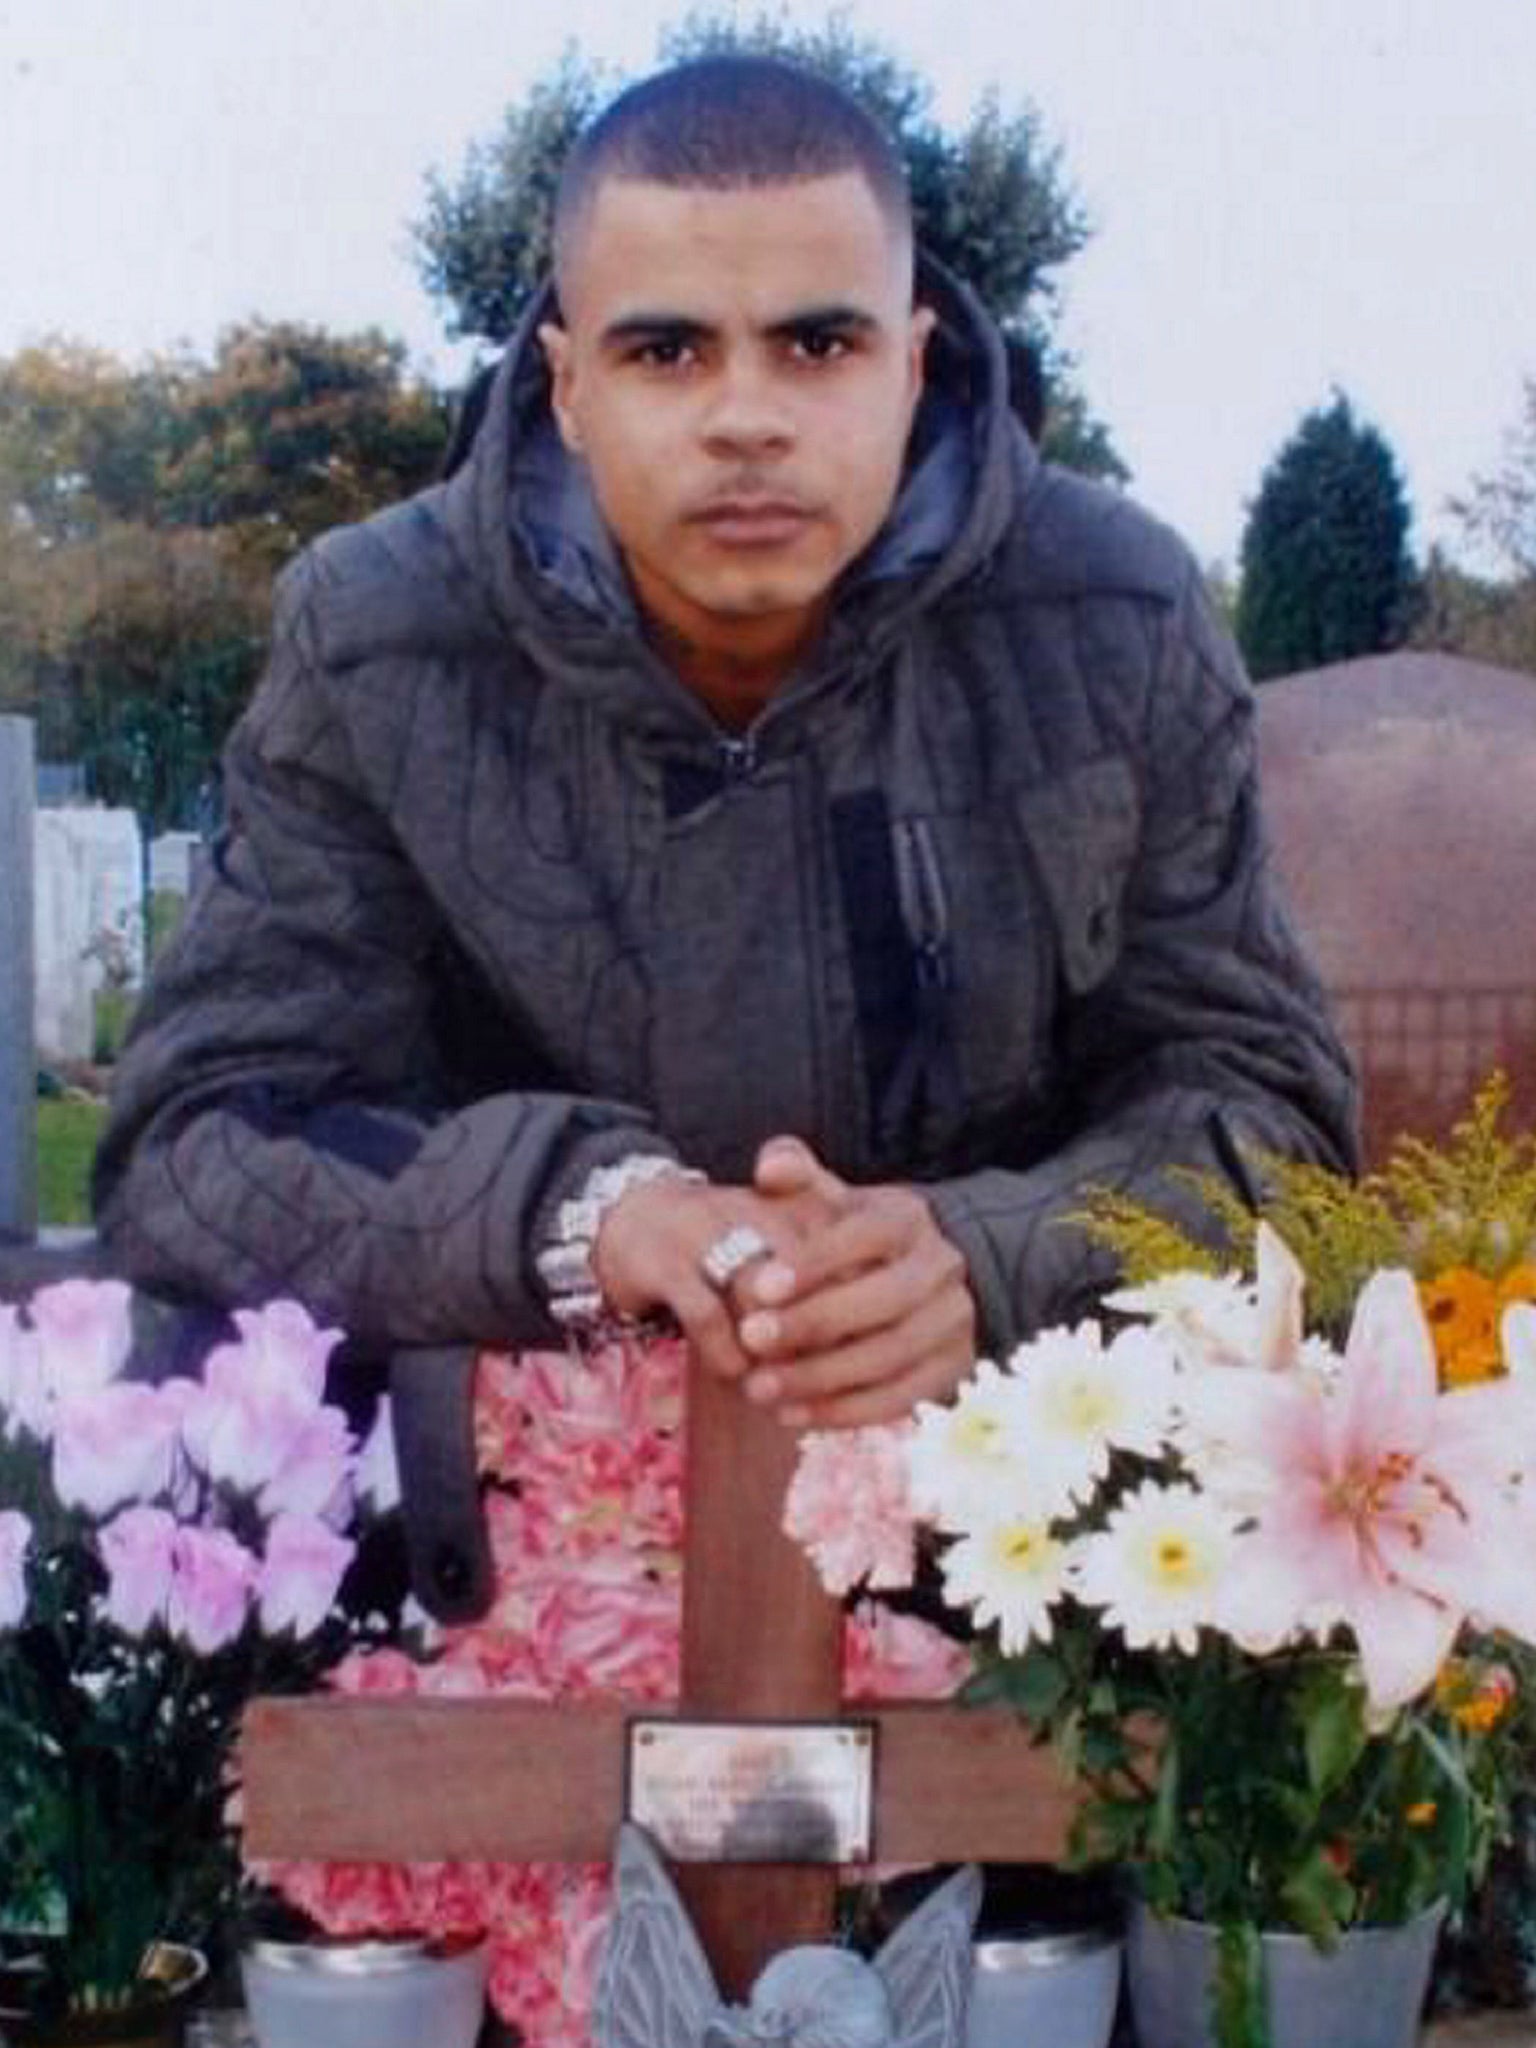 Mark Duggan at his daughter’s grave in Enfield cemetery, before his death in 2011